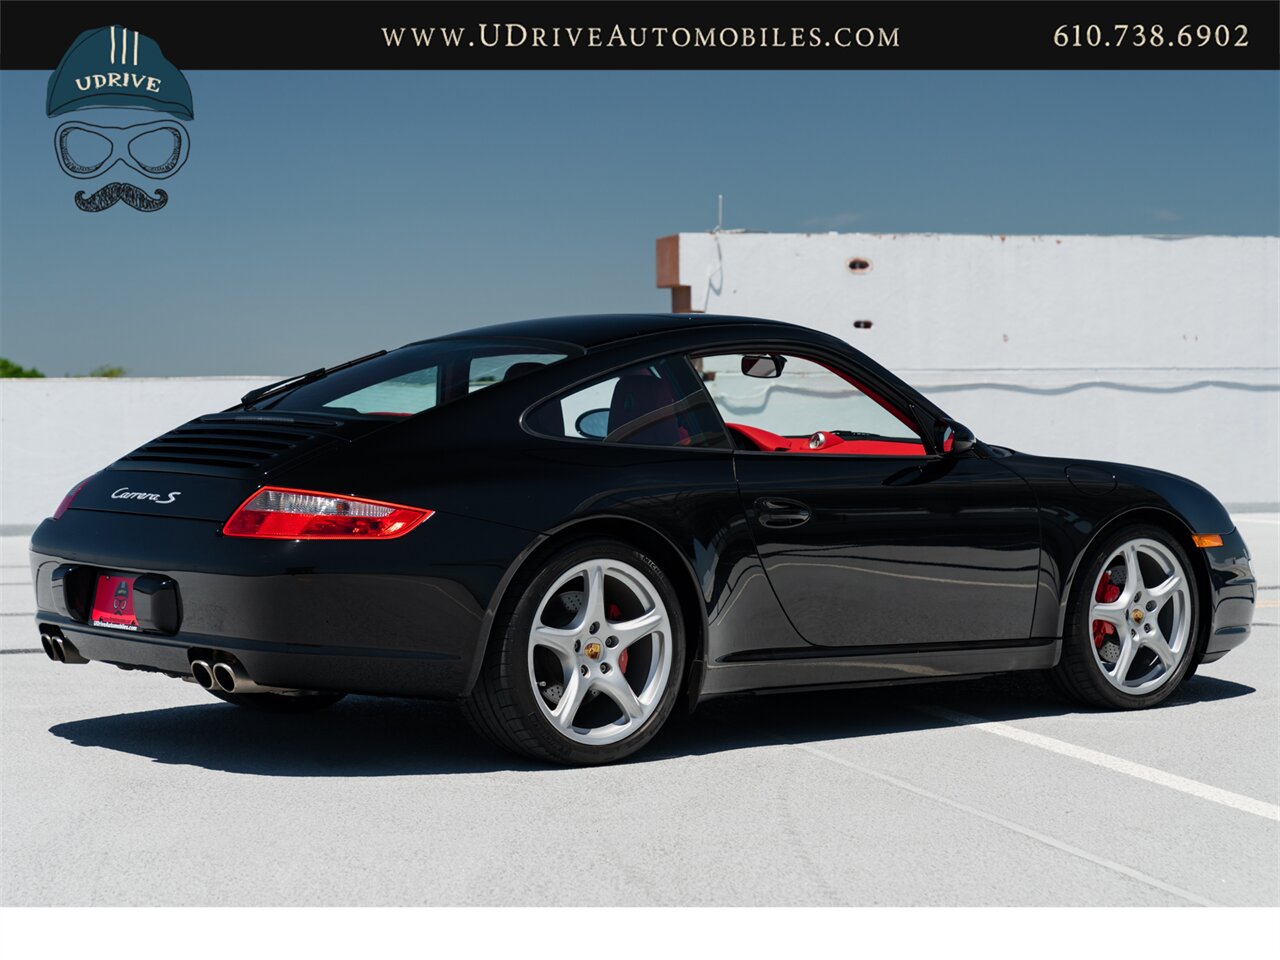 2005 Porsche 911 Carrera 911S 997 6 Speed 13k Miles Chrono  Leather to Sample Boxster Red/Blk Service History - Photo 19 - West Chester, PA 19382